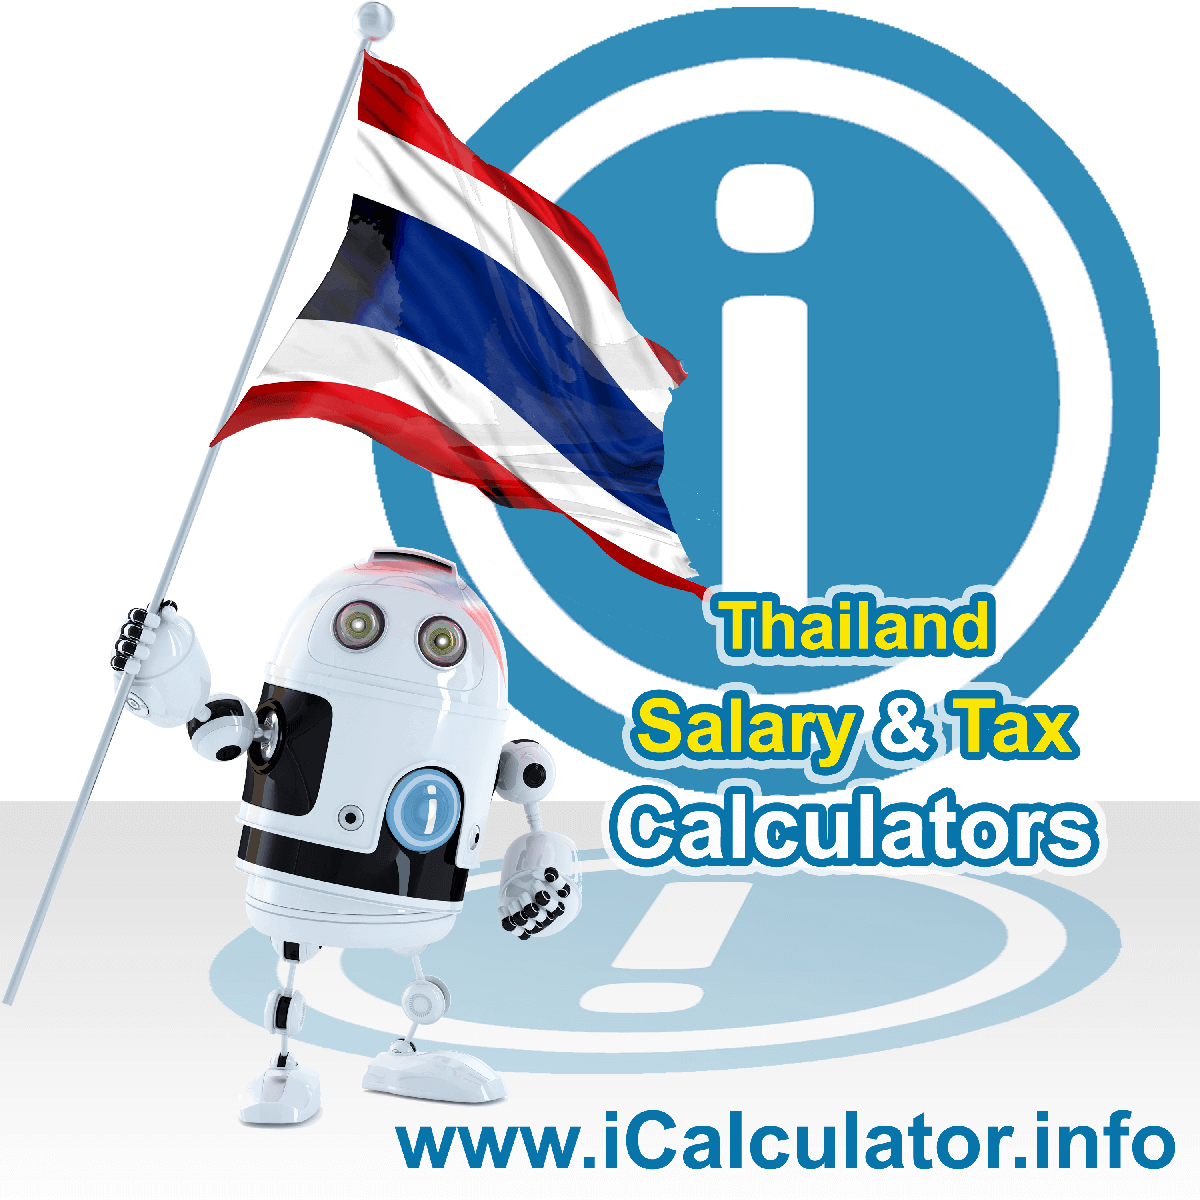 Thailand Salary Calculator. This image shows the Thailandese flag and information relating to the tax formula for the Thailand Tax Calculator